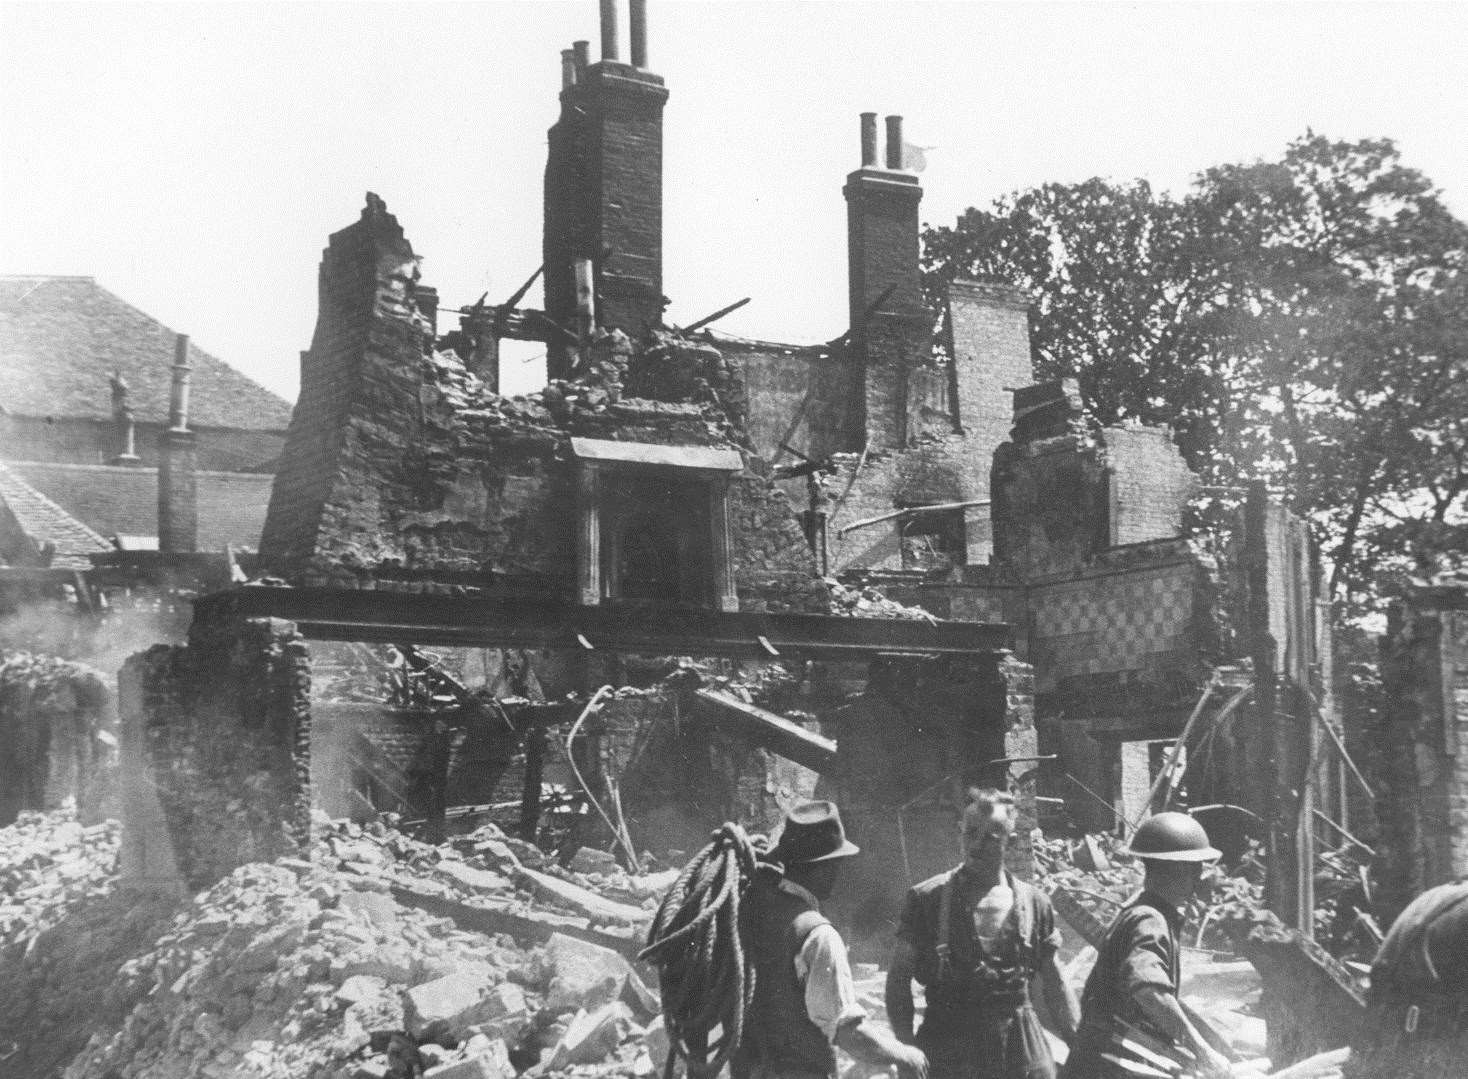 Service personnel try to find survivors in the debris that once was Dashwood's toy shop